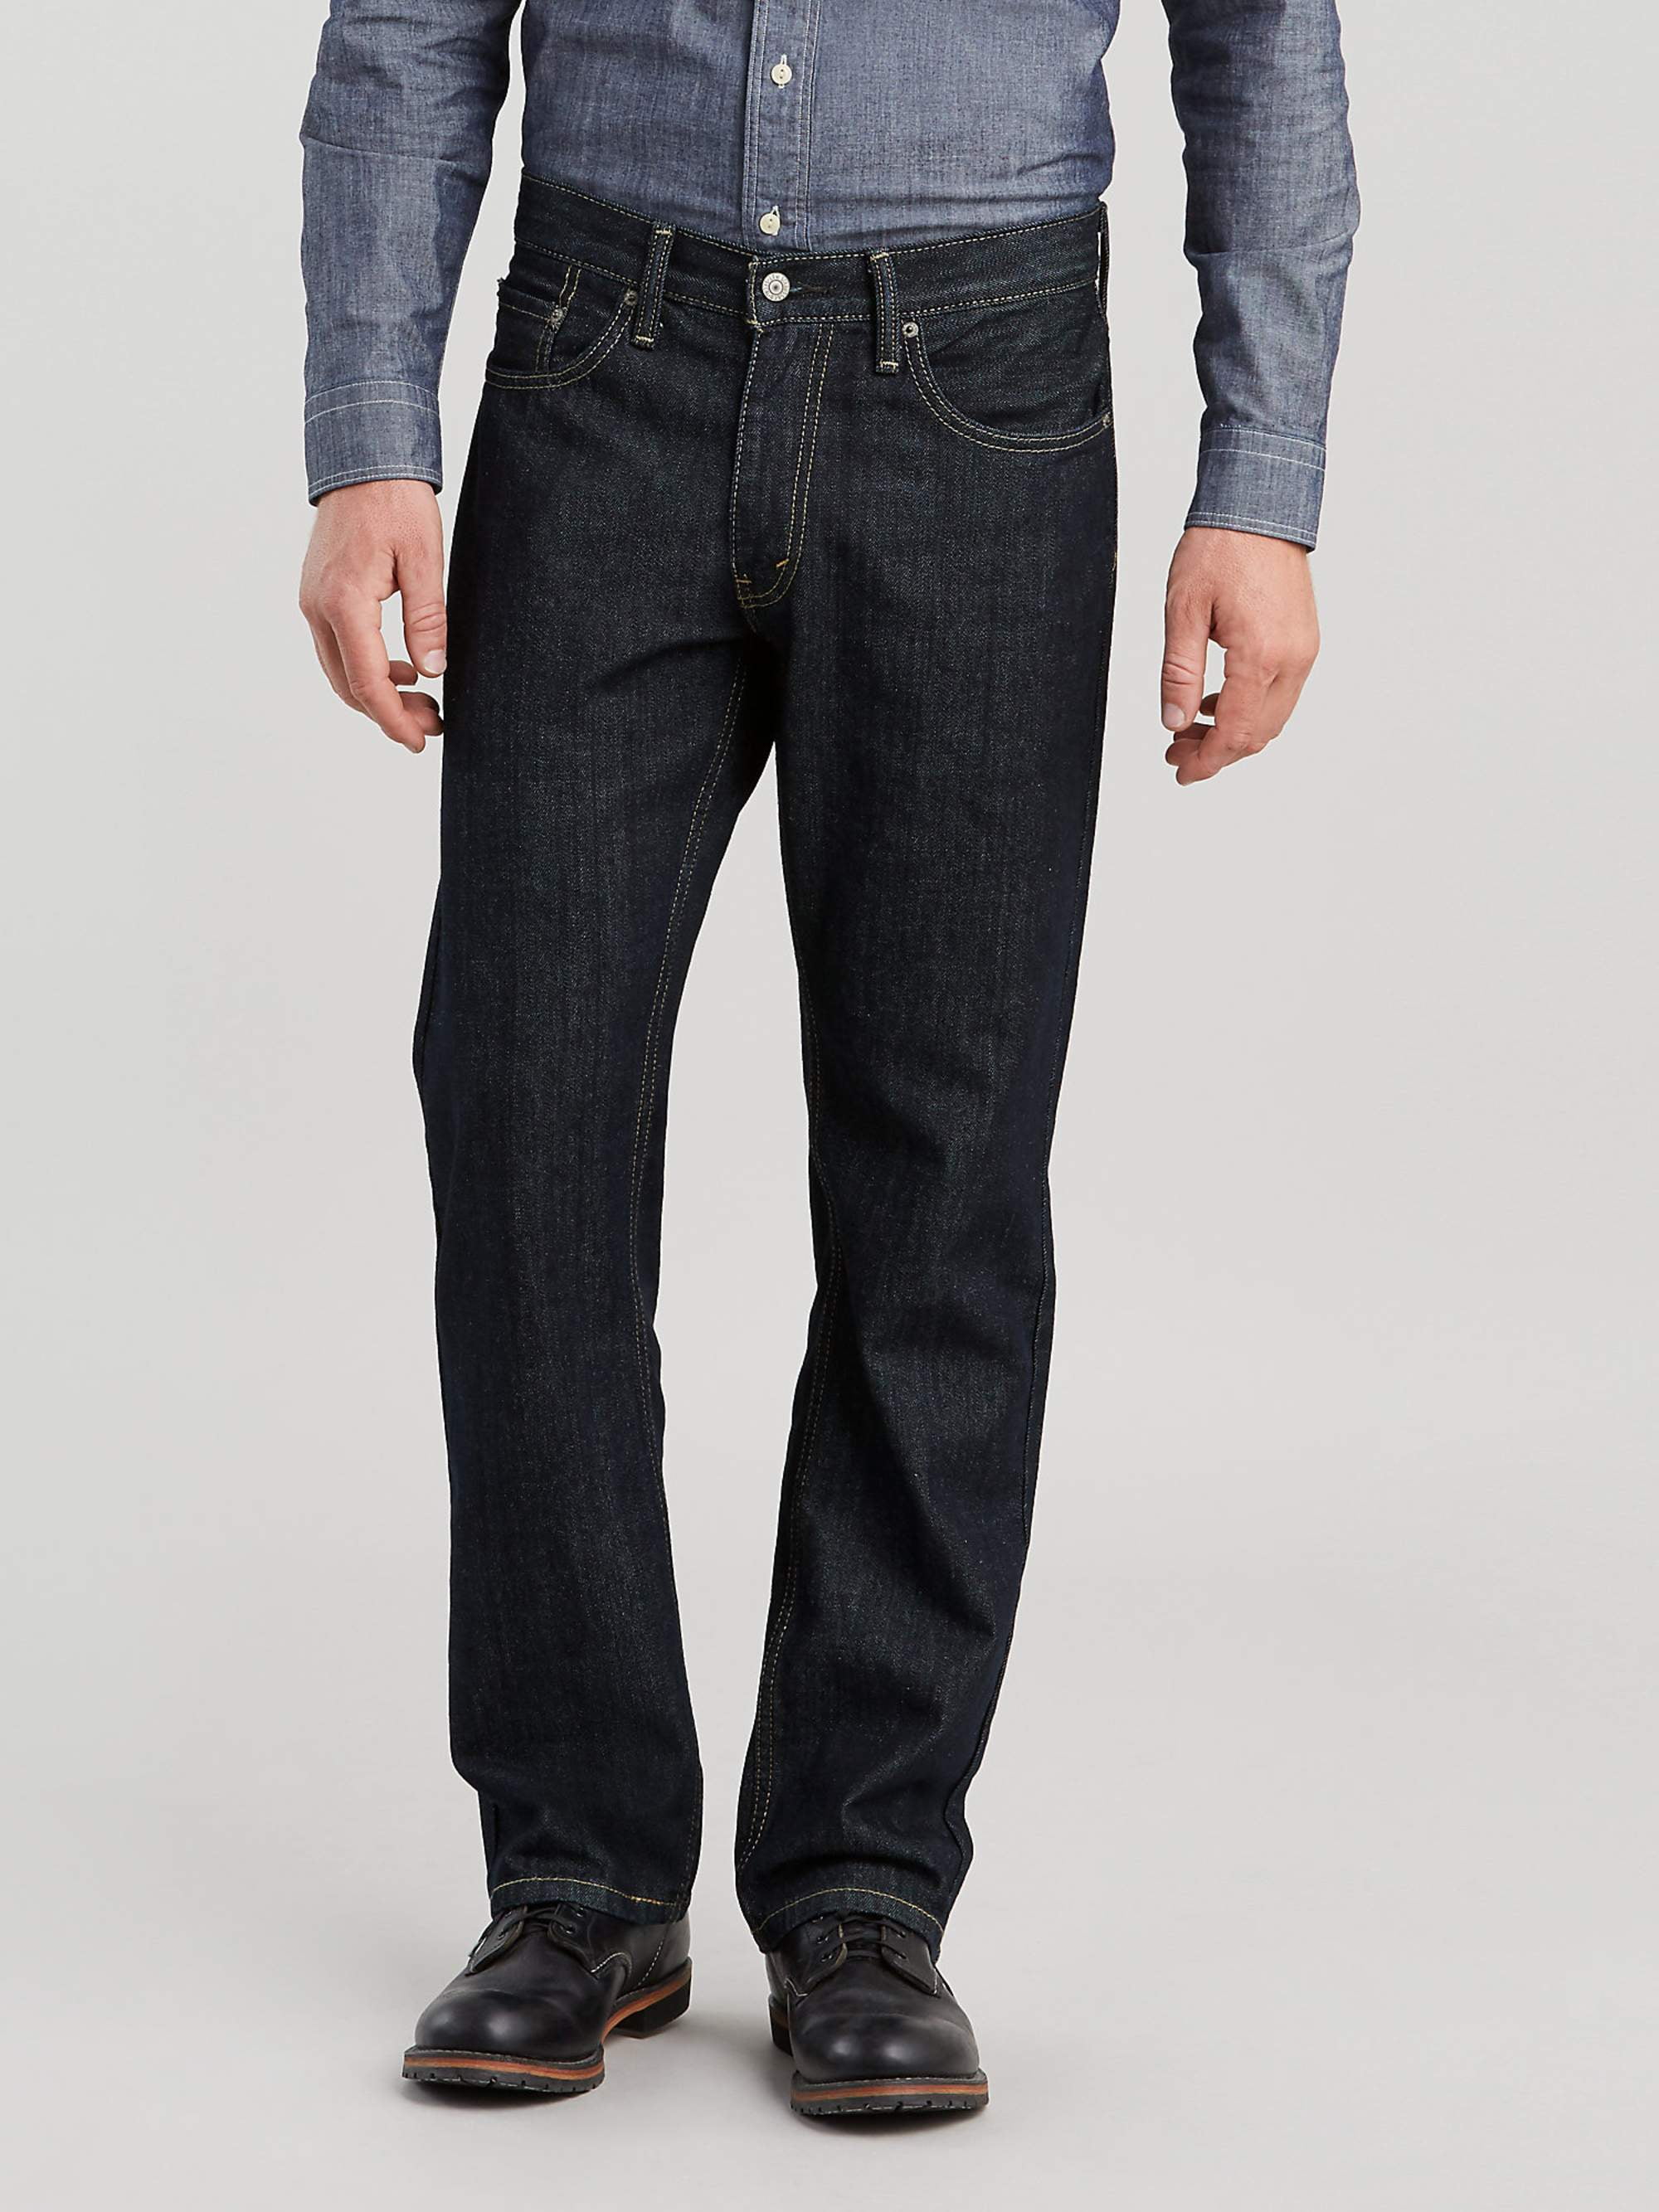 Levi's Men's 559 Relaxed Straight Fit Jeans - Walmart.com